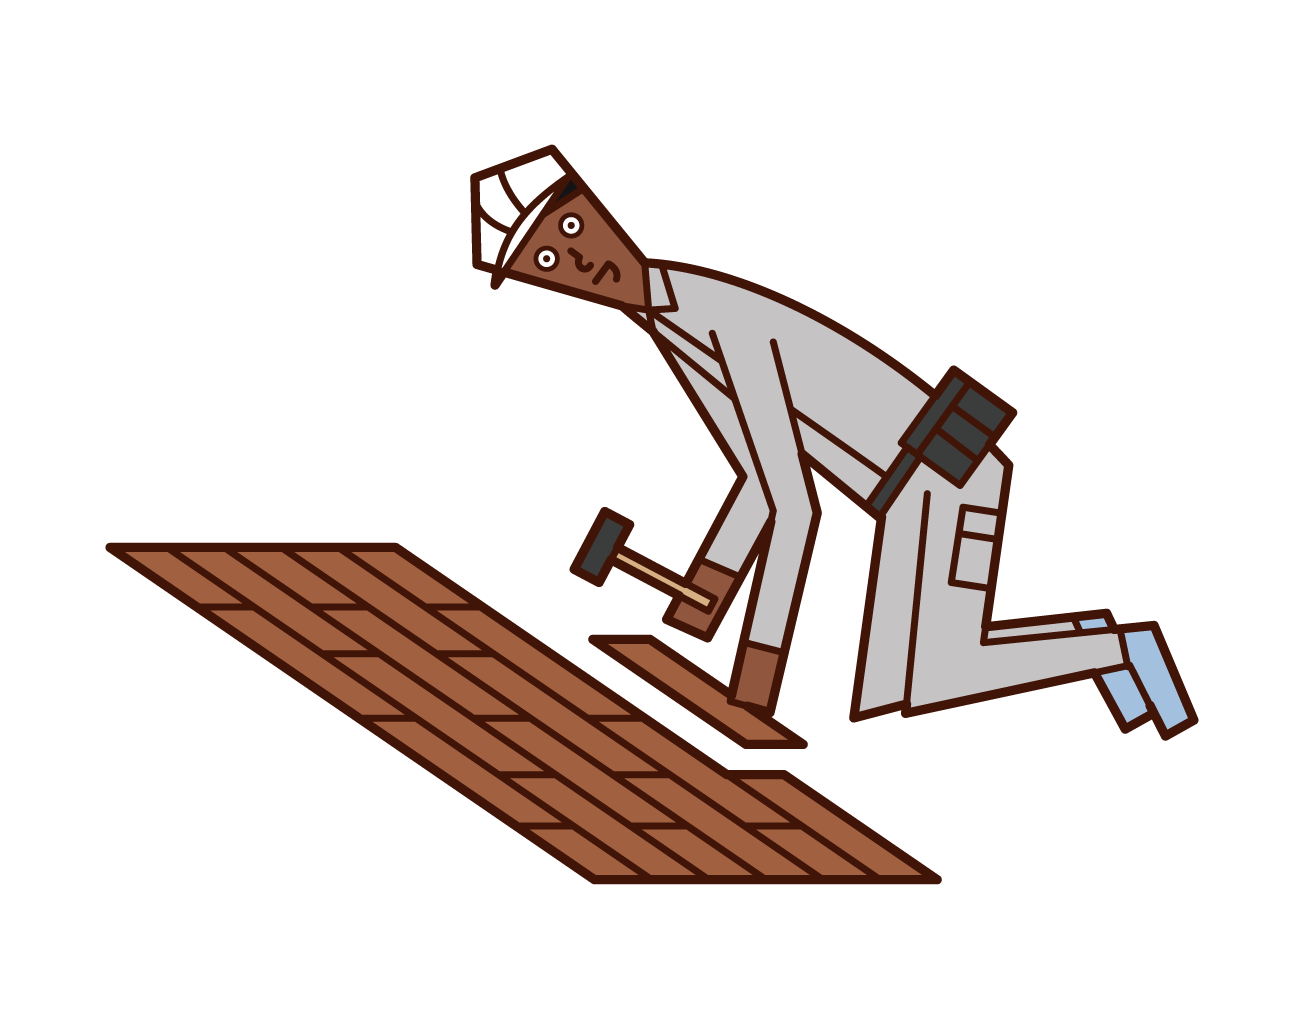 Illustration of a person who pastes flooring and a person (man) who works on interior construction